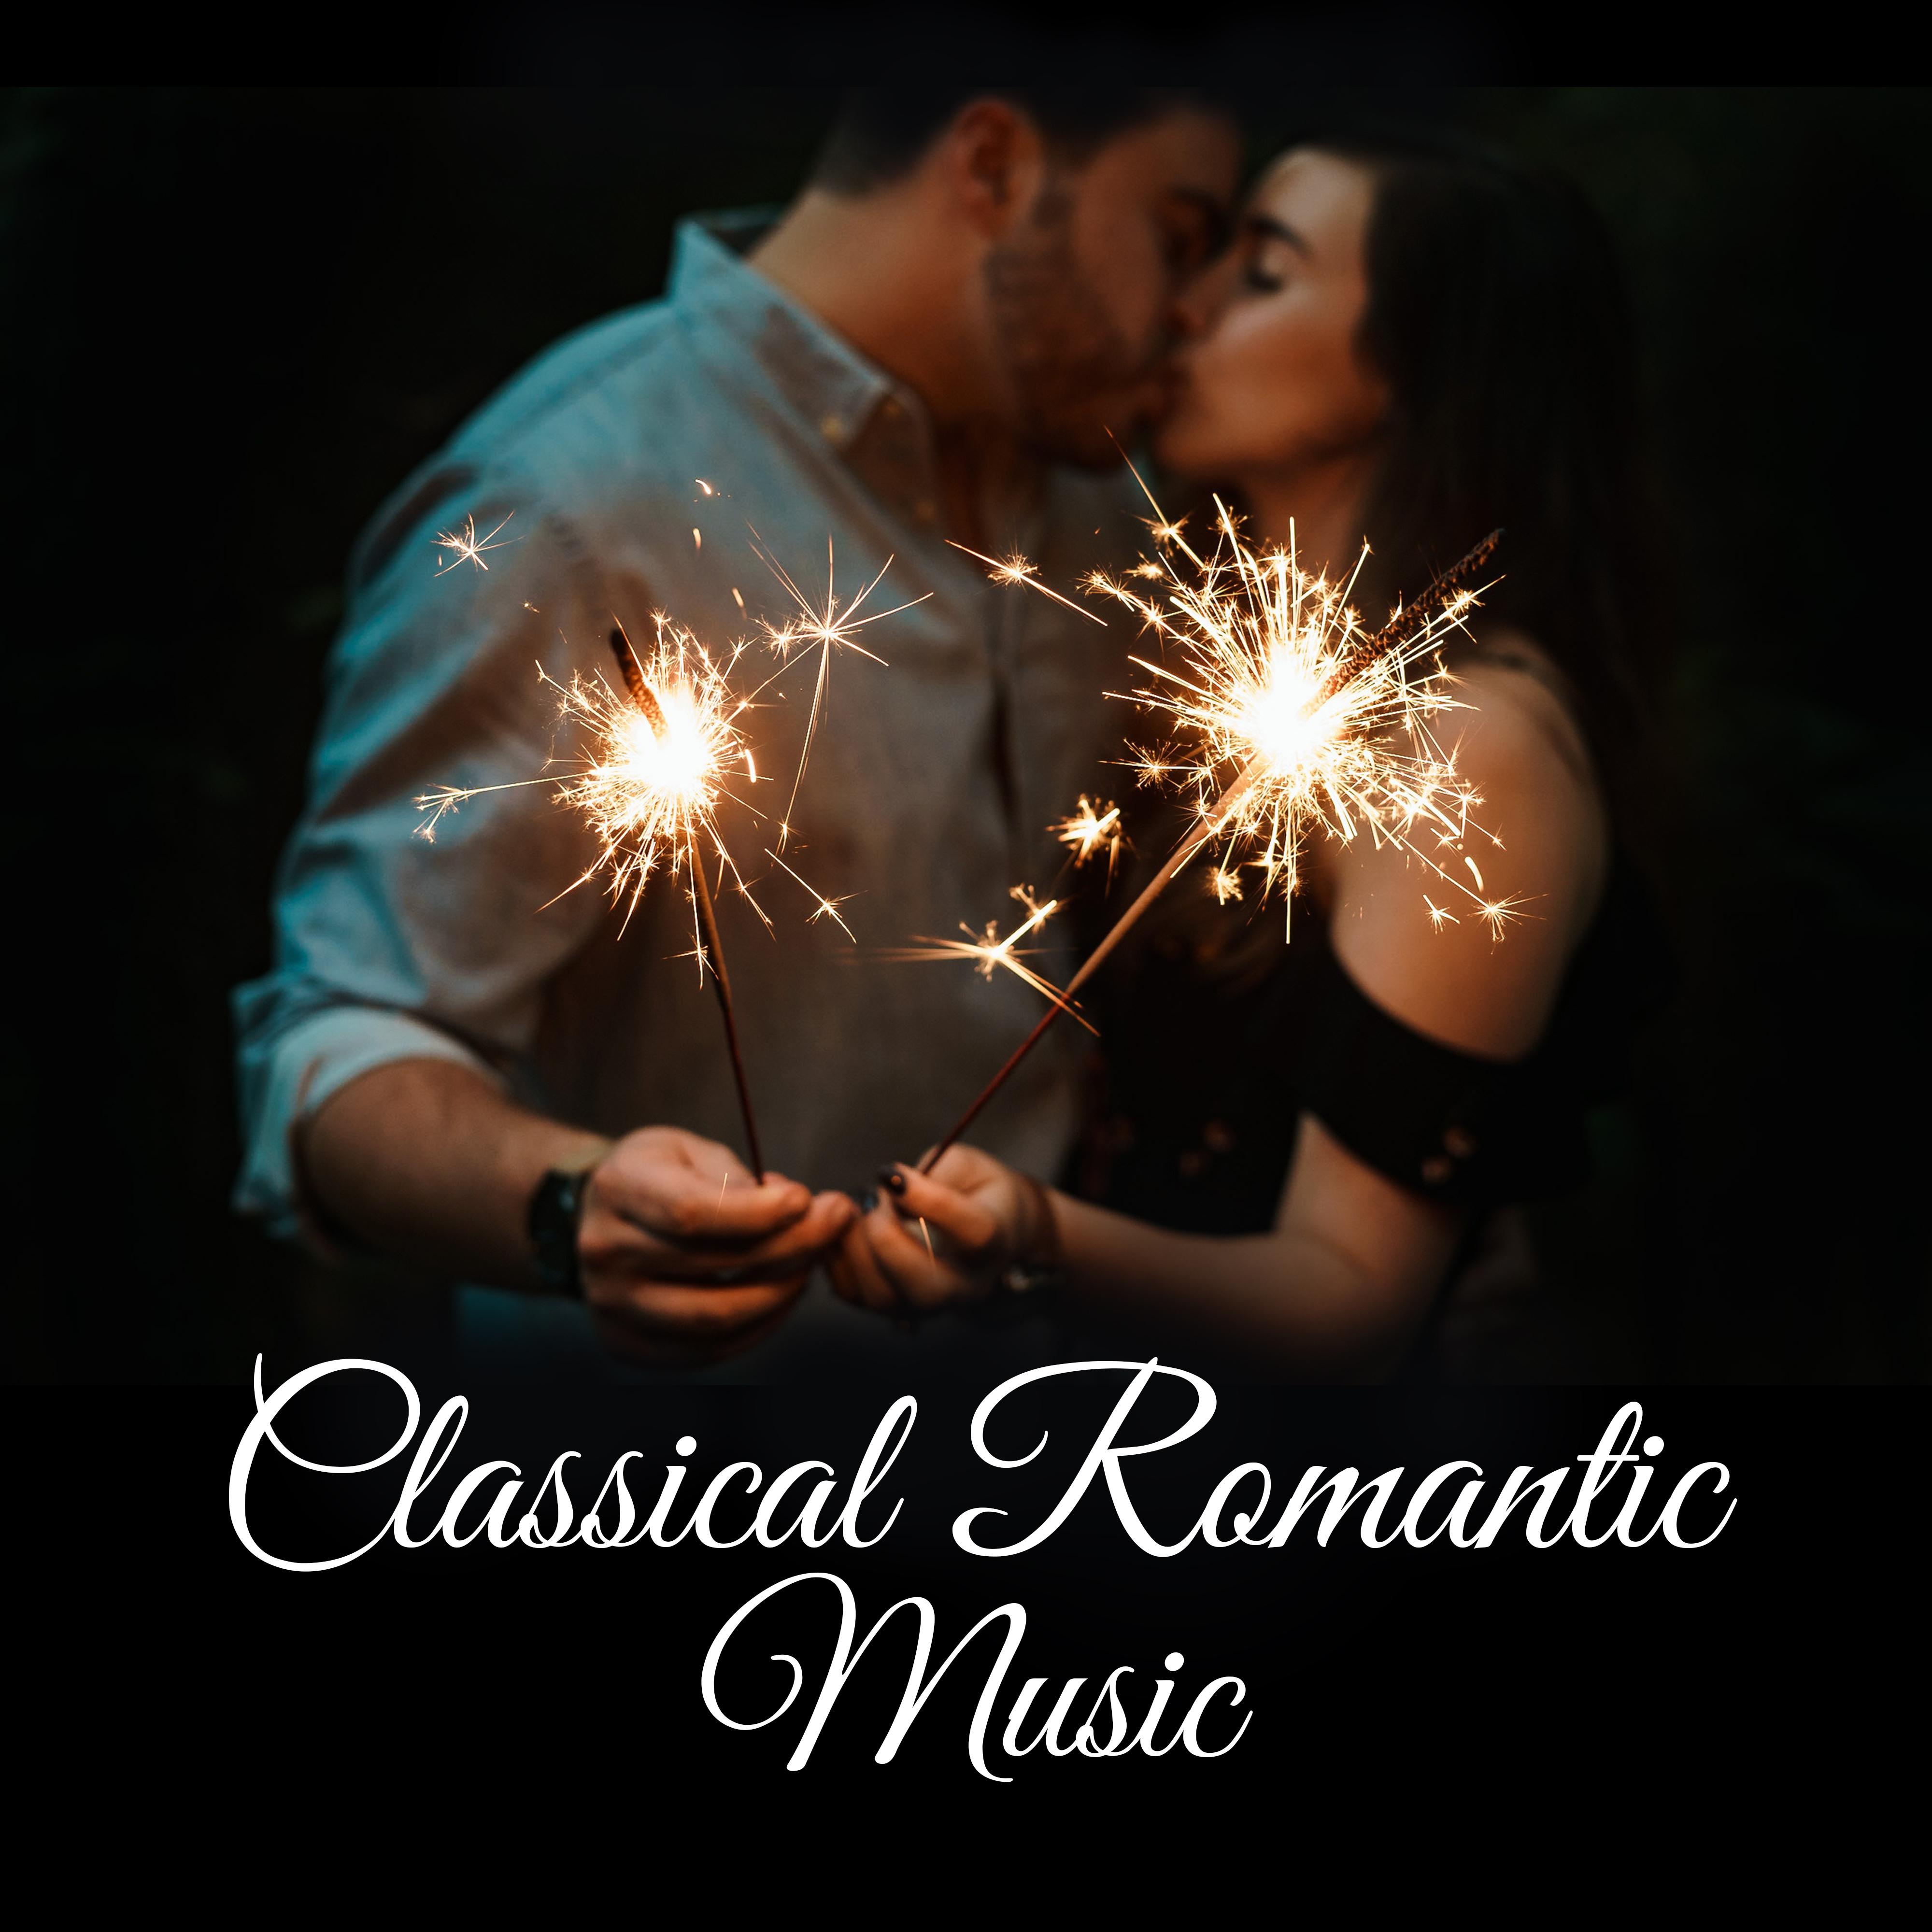 Classical Romantic Music – Soothing Classical Music Compilation, Relaxing Piano Melodies, The Best of Classical Artist